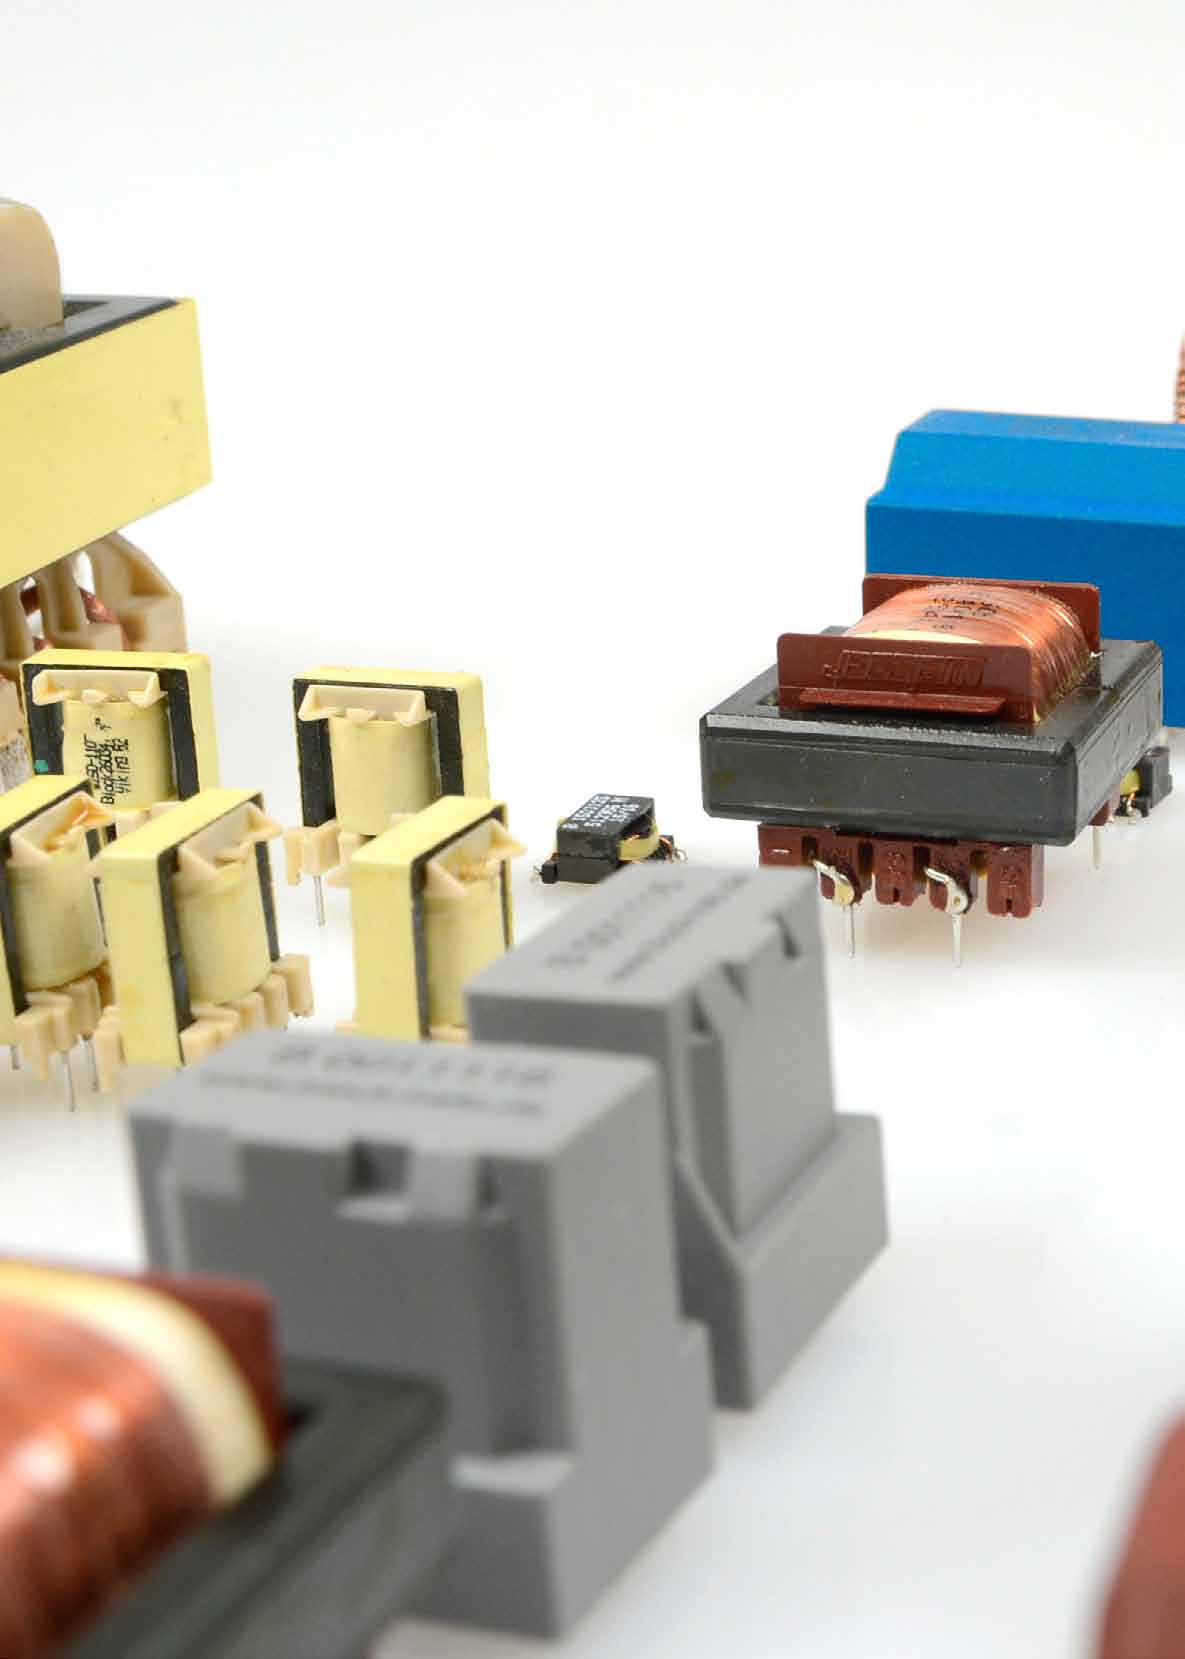 Transformers 1 Transformadores Components for switched mode power supplies When it comes to inductive components BLOCK provides excellent service to fulfill your needs.